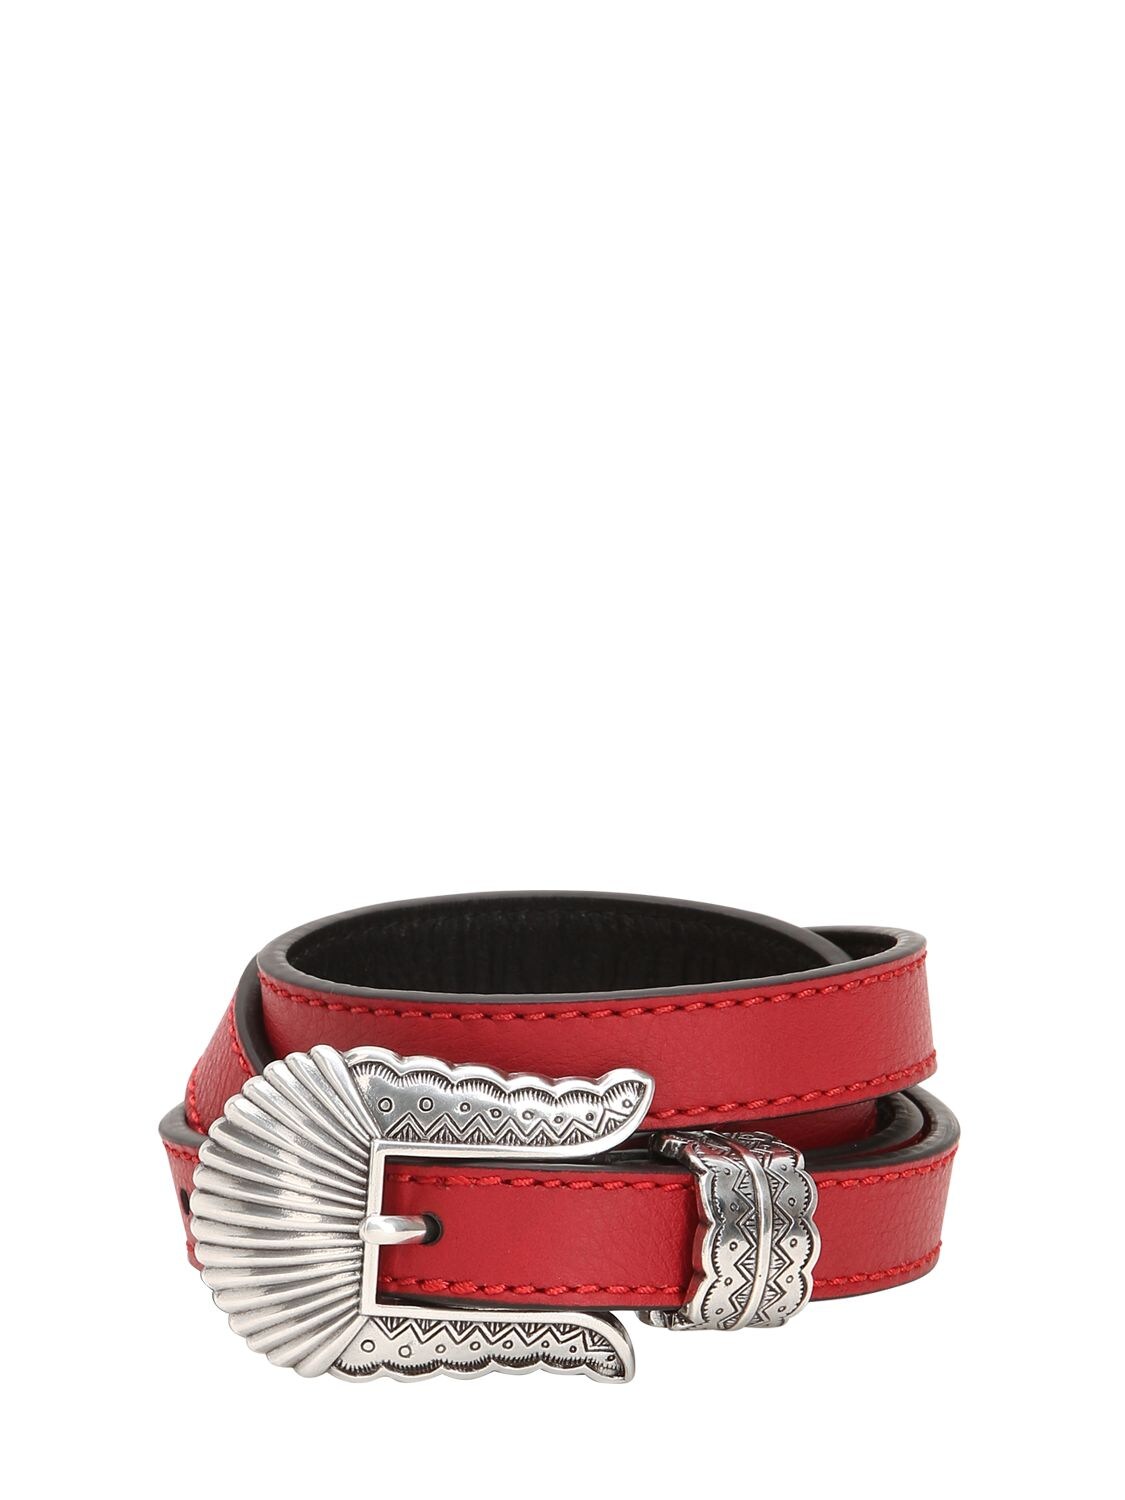 Kate Cate 19mm Thin Kim Nappa Leather Belt In Red